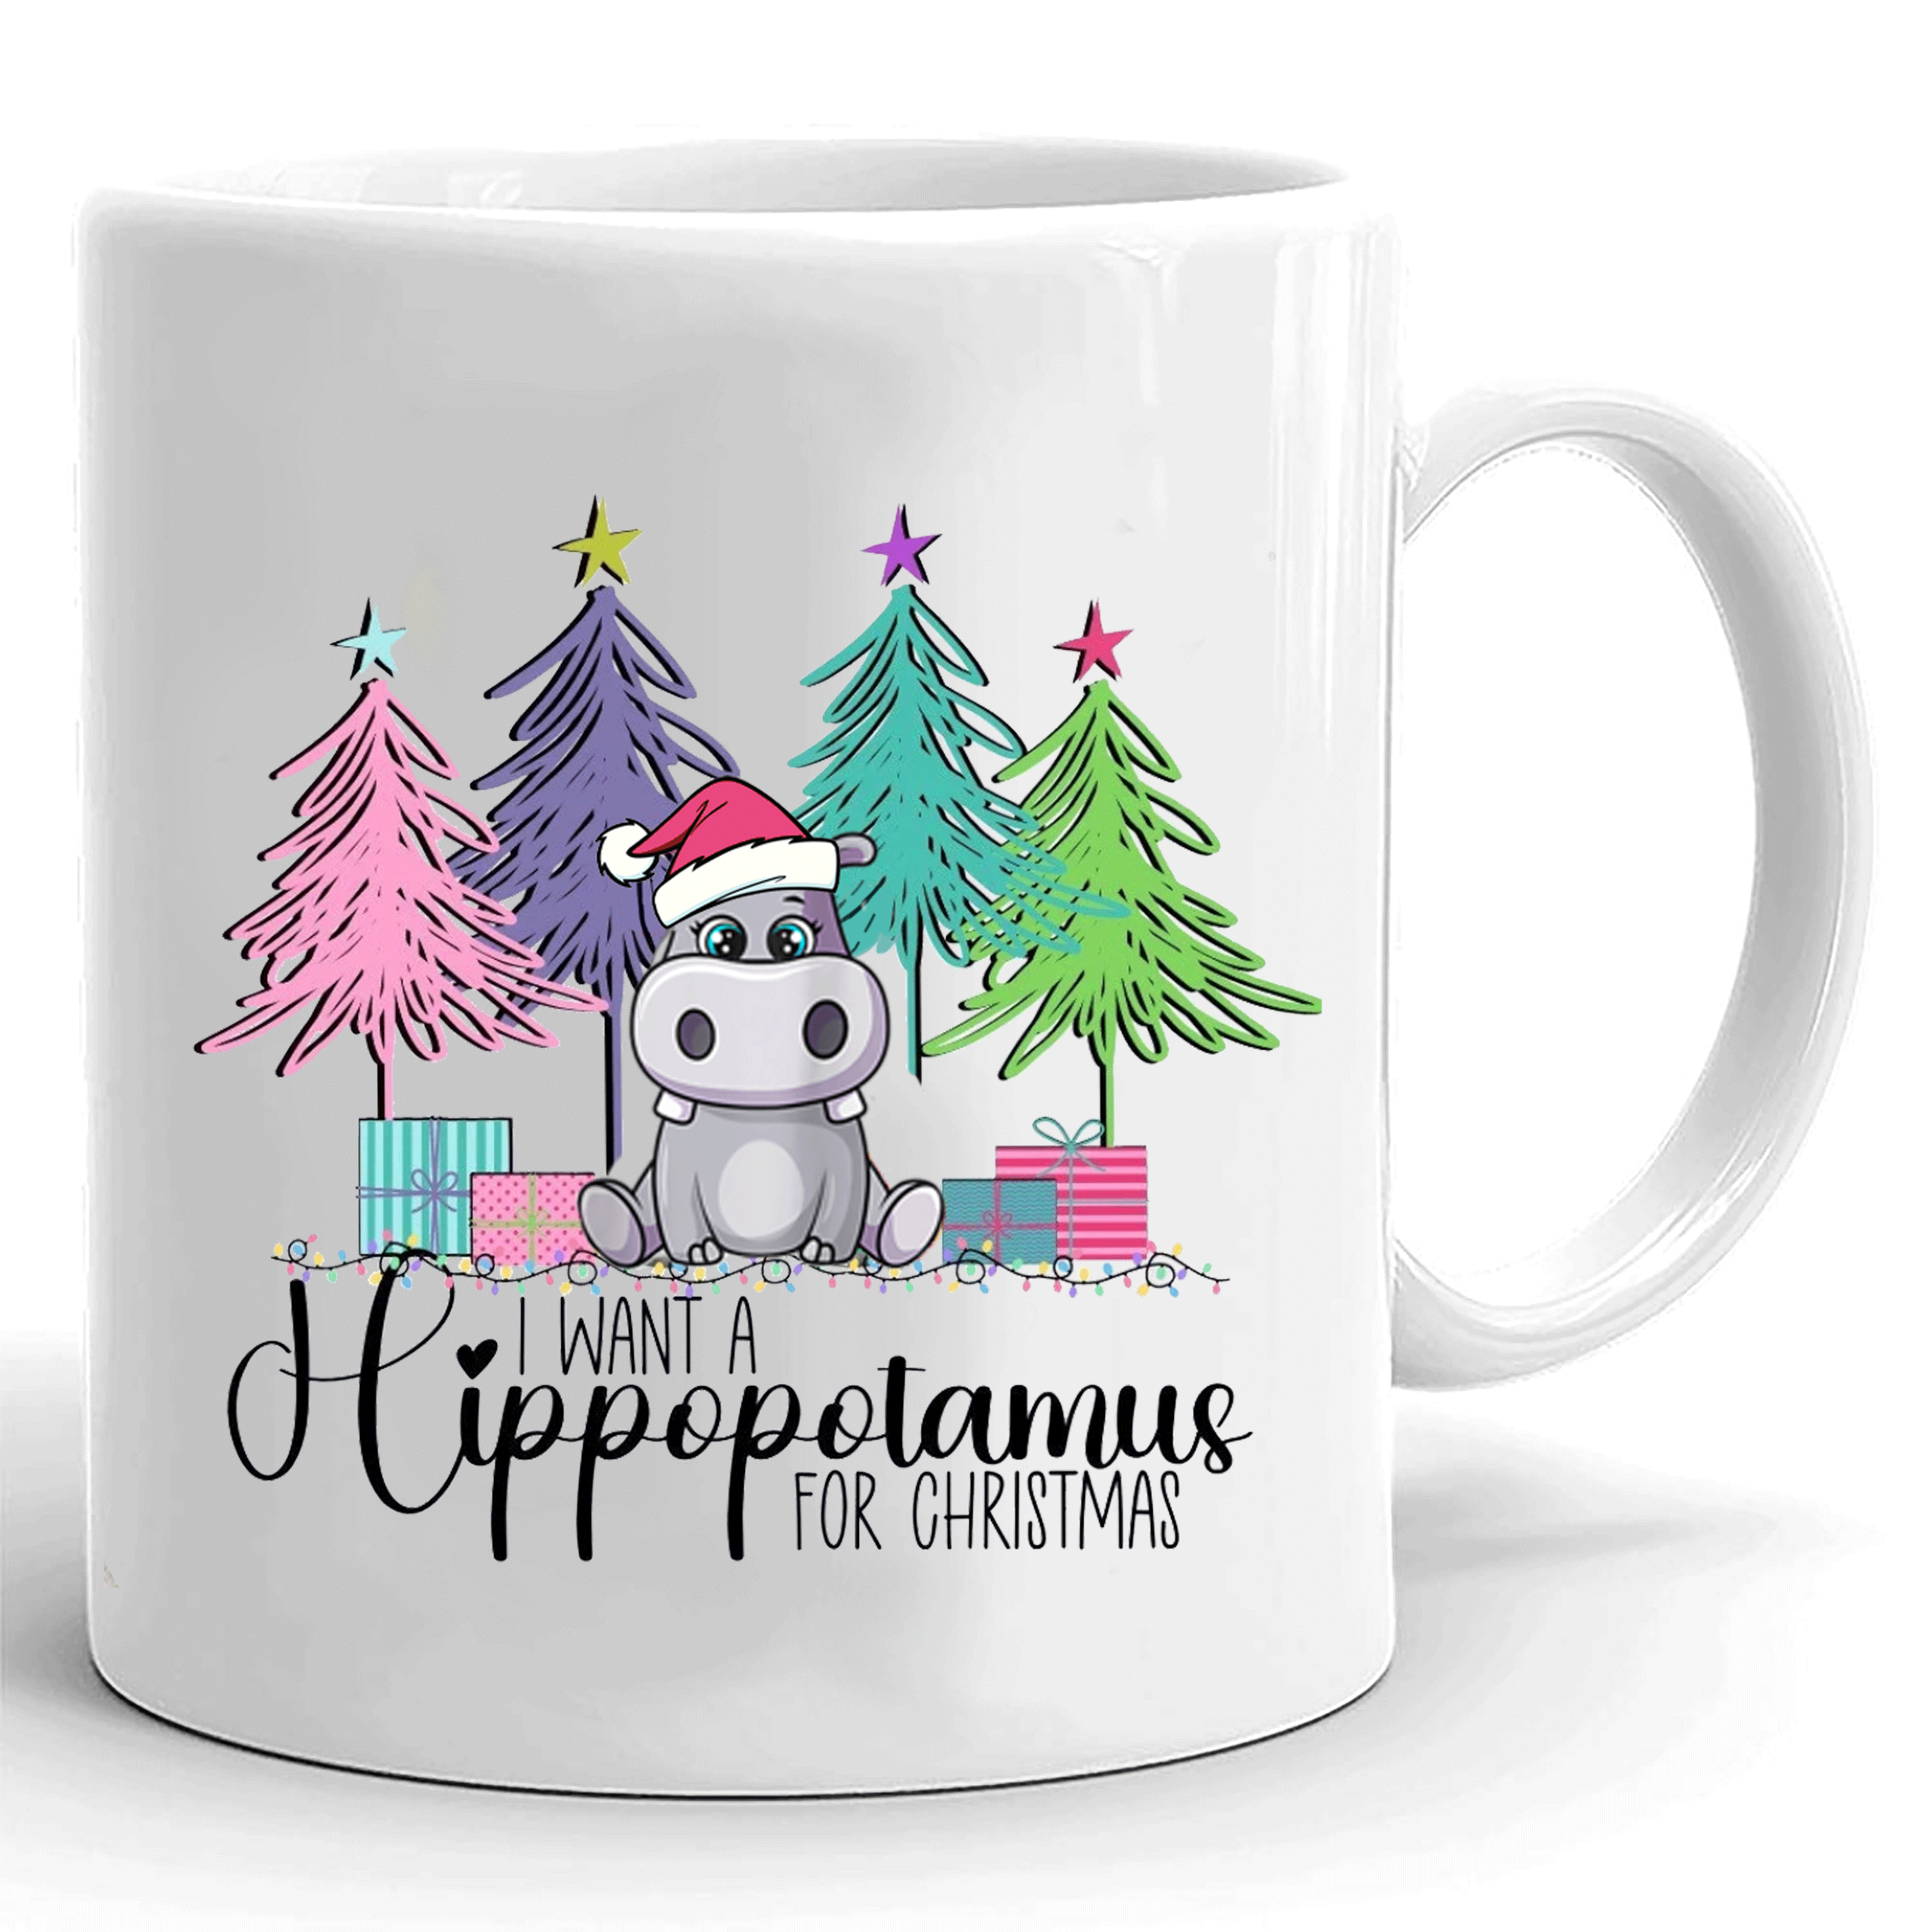 I Want A Hippopotamus For Christmas Mug, Christmas Hippo Mug Gifts For Women For Men, Ceramic Coffee Cup Gifts For Family For Friend On Holiday Christmas